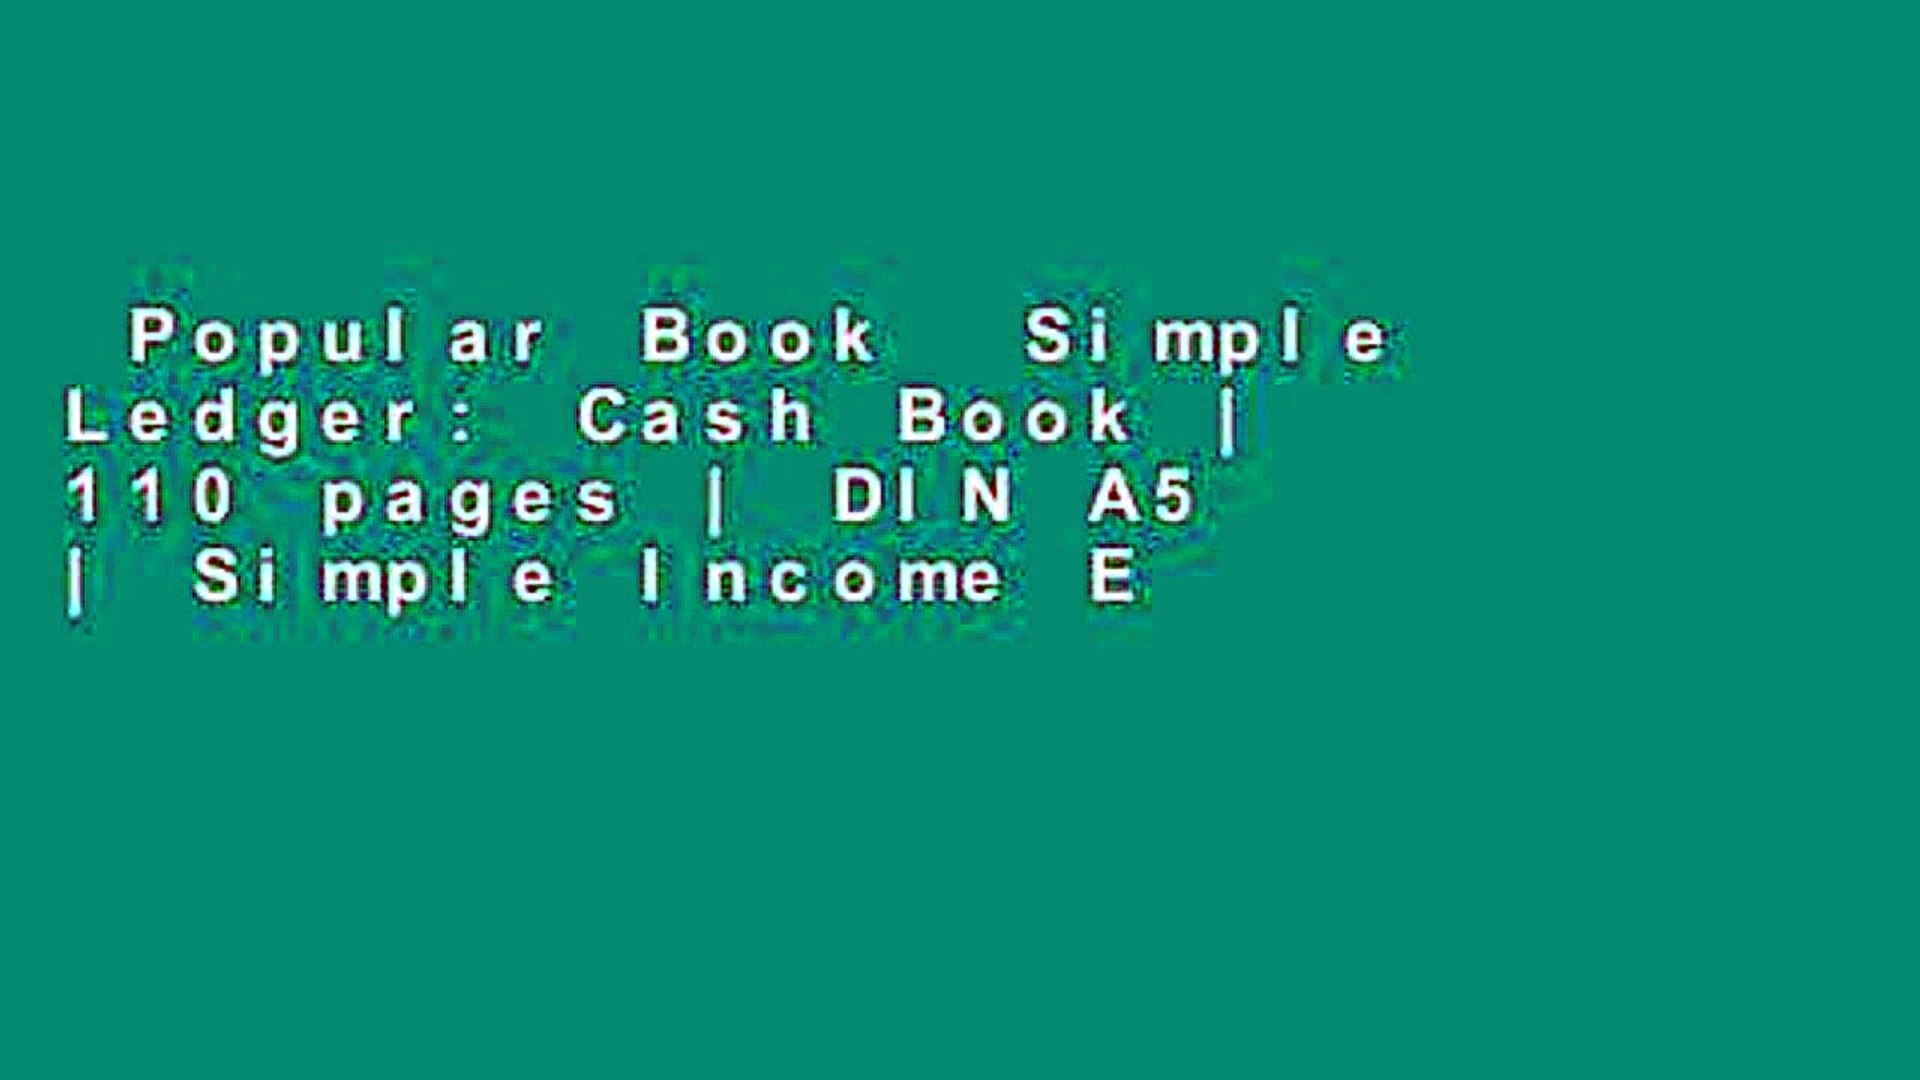 Cash Book110 pagesDIN A5Simple Income Expense Book| Simple Ledger 